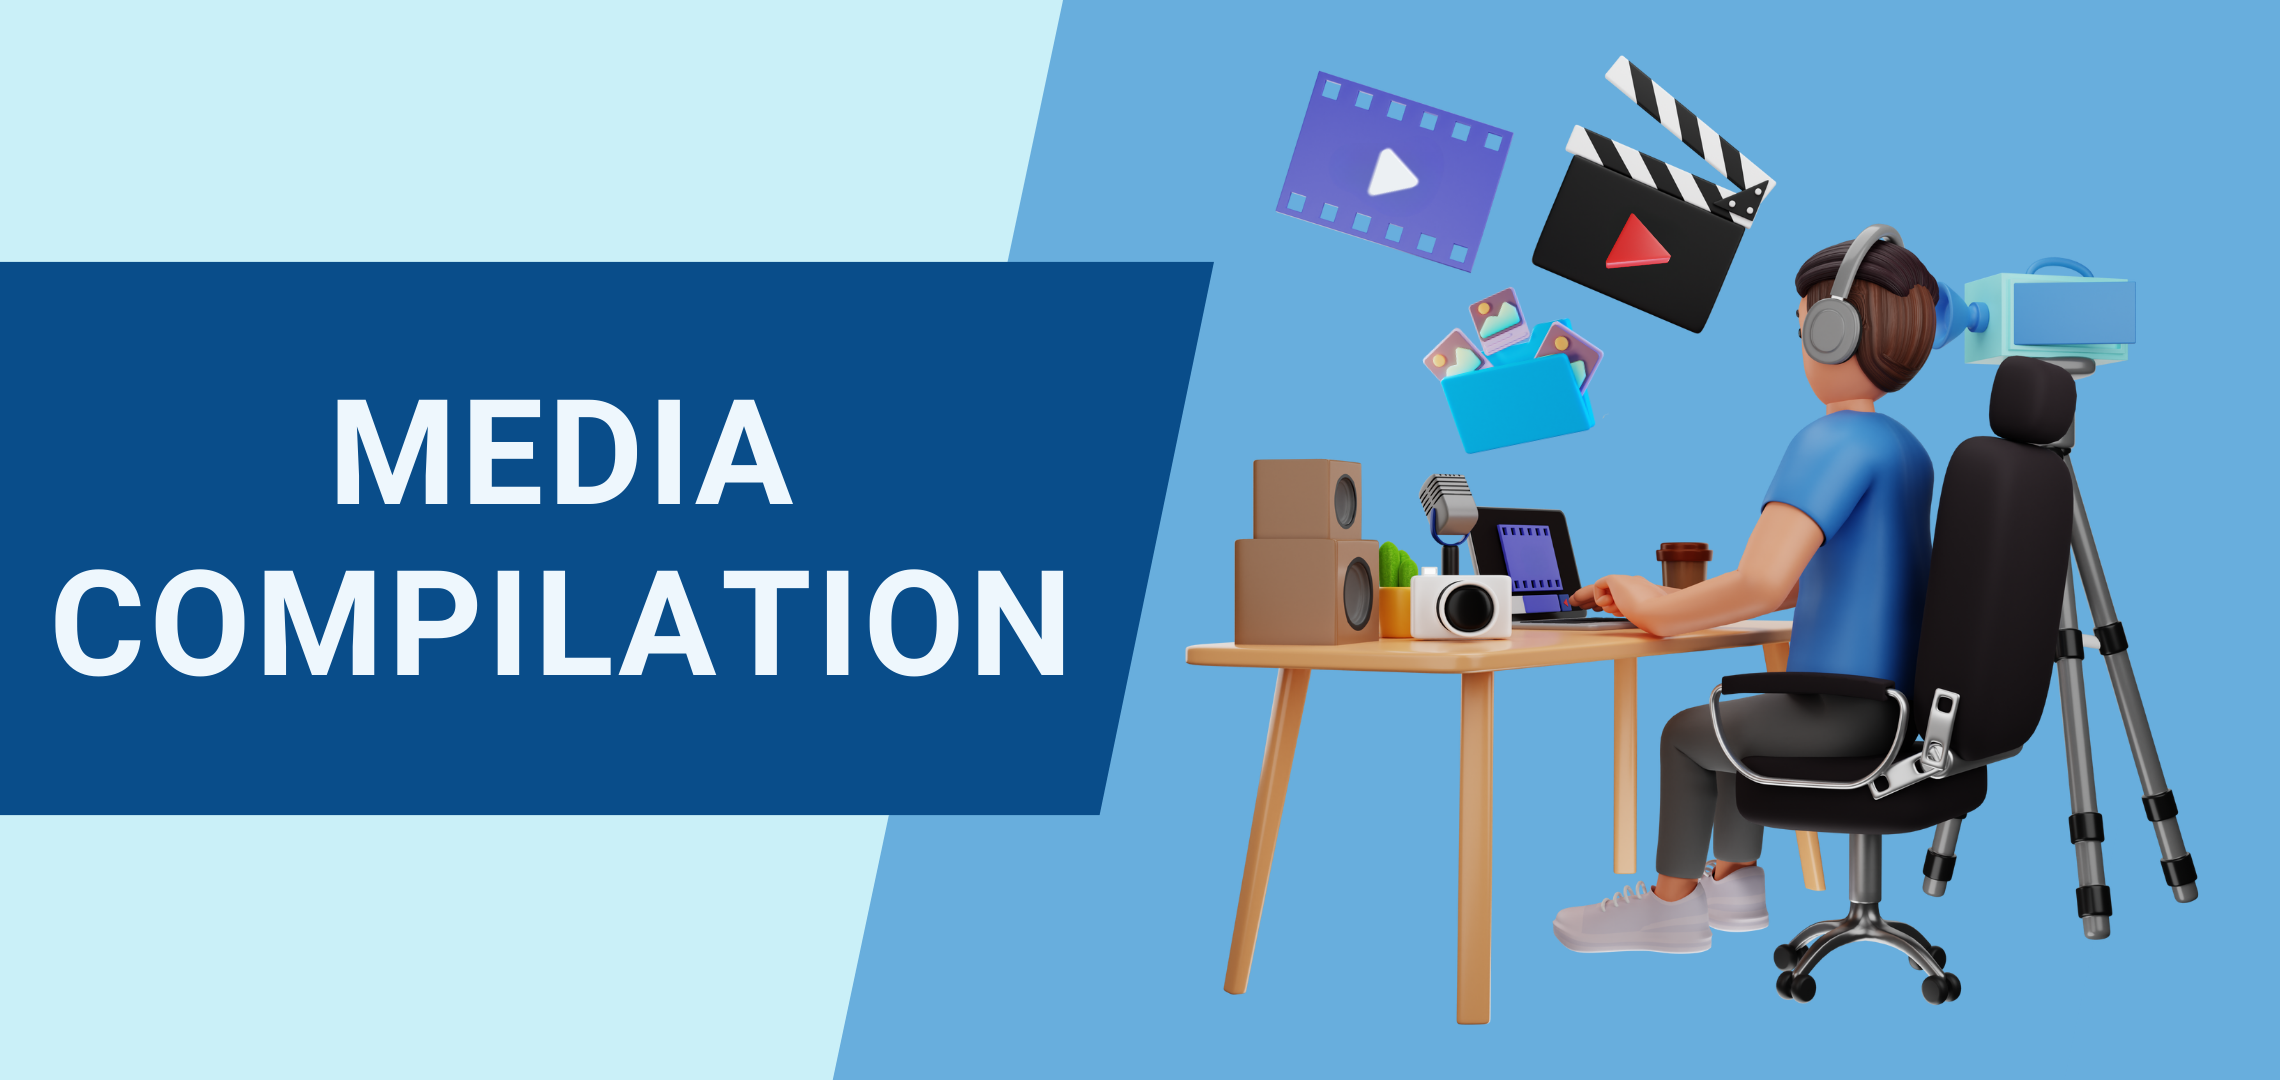 Media Compilation services